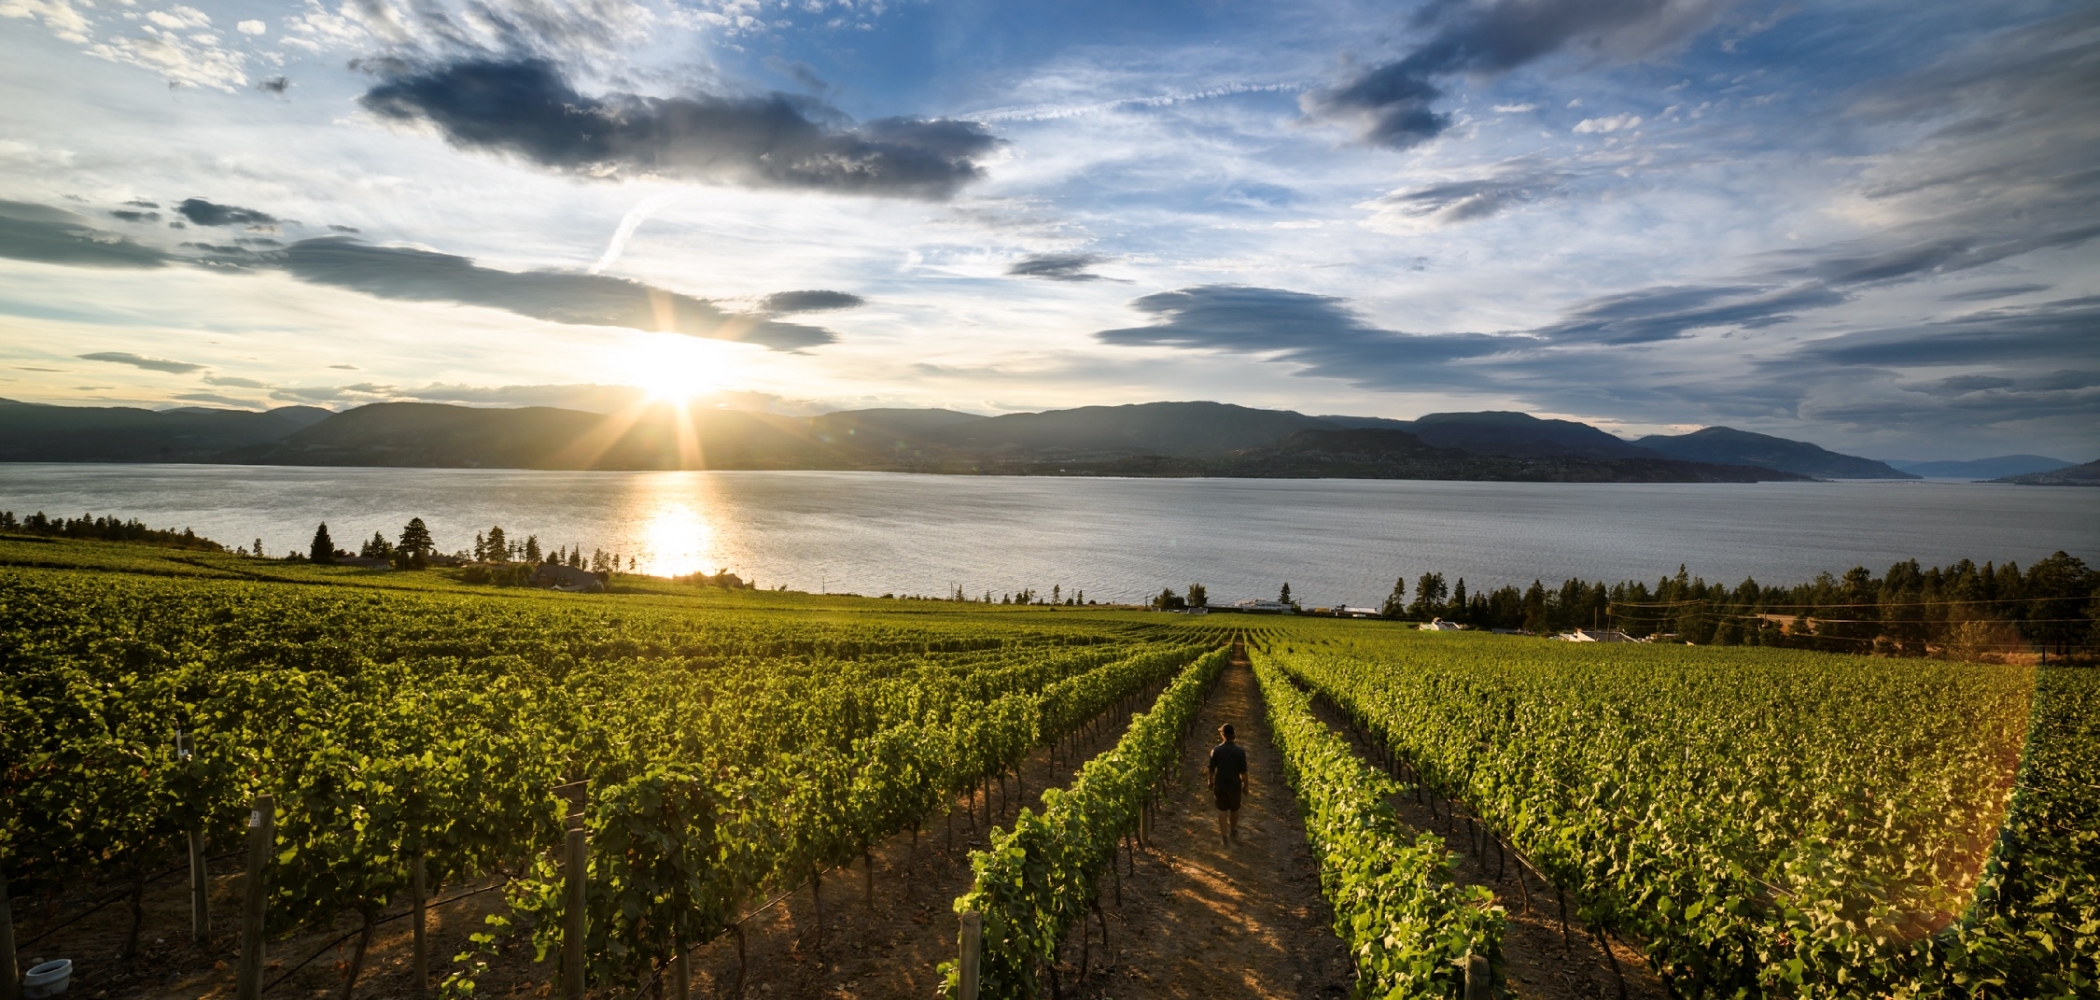 Wineries & Wine Tours in BC Canada